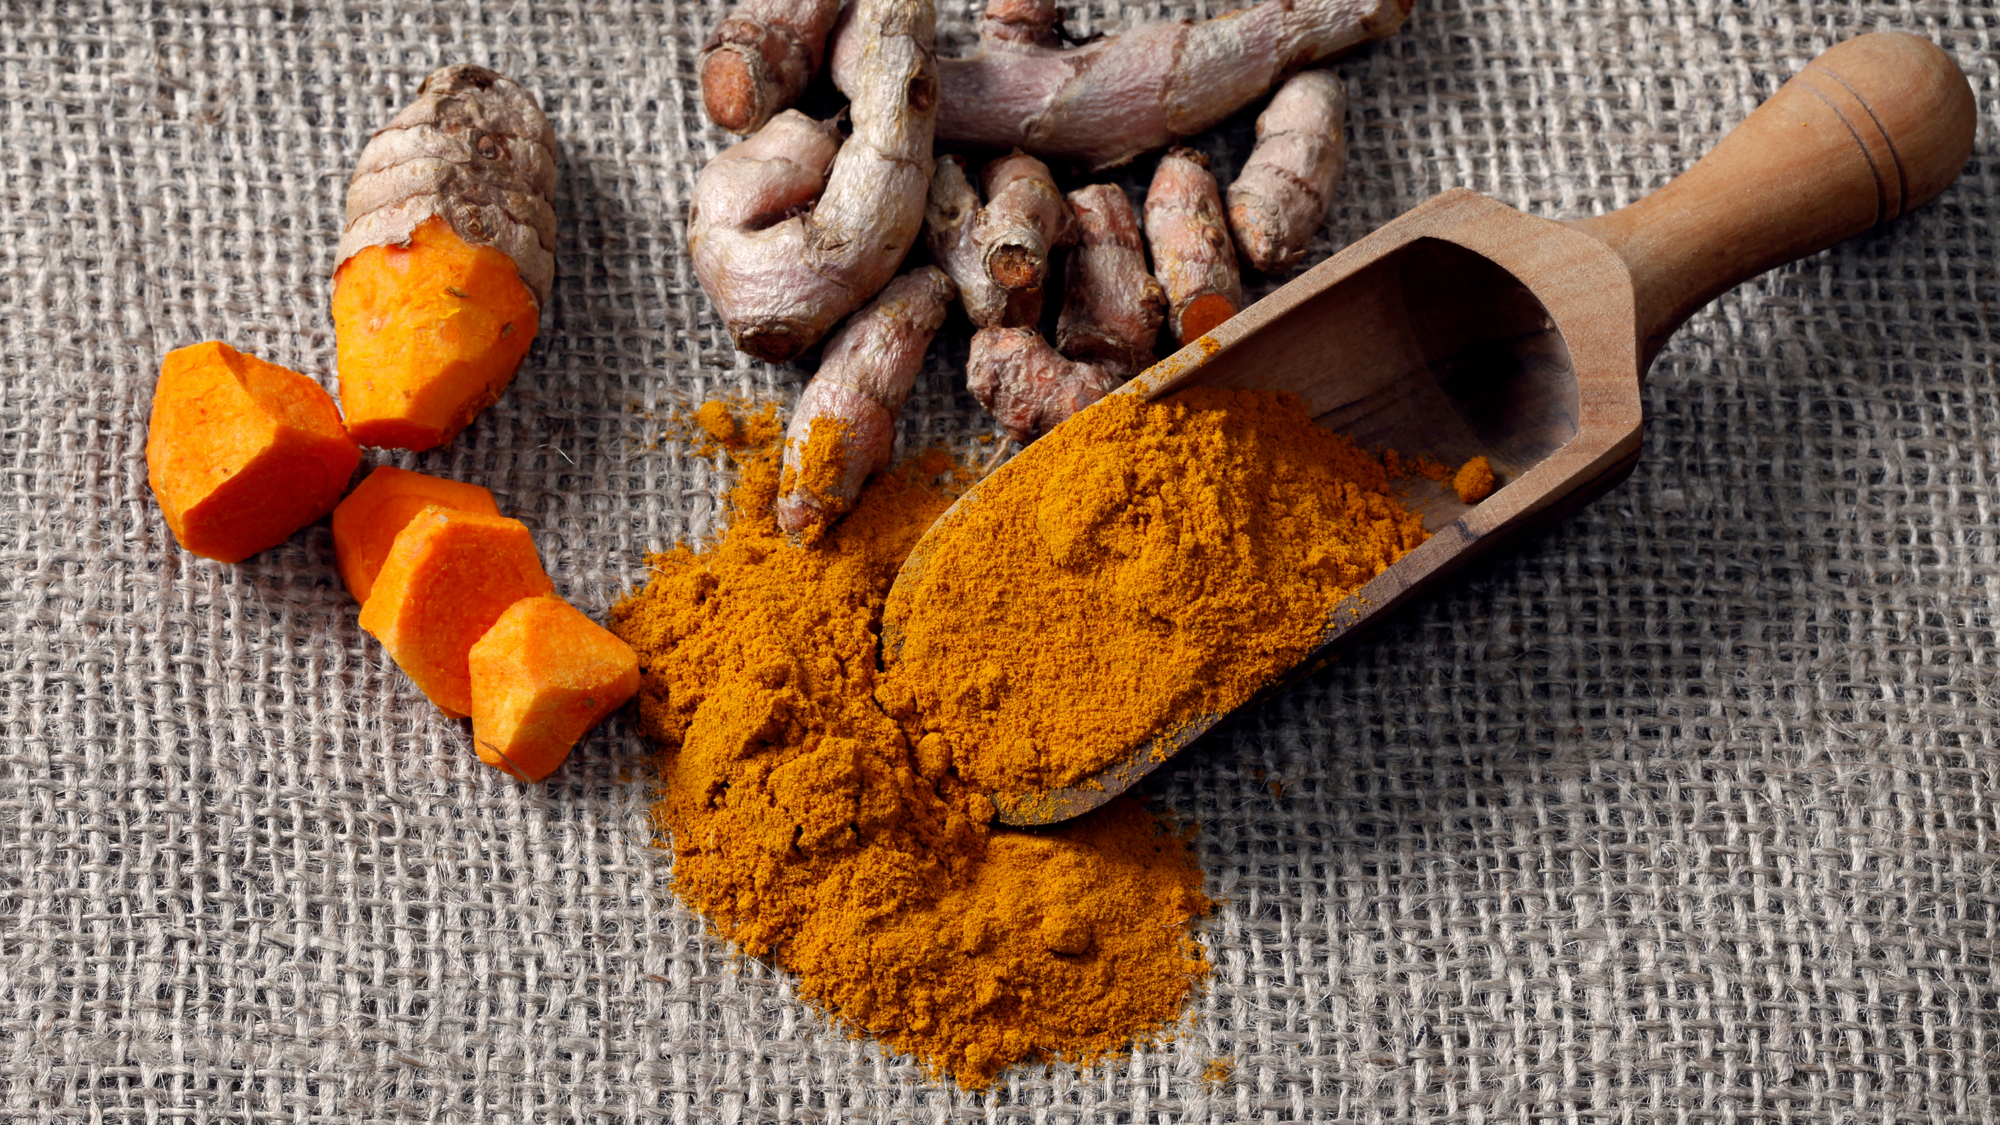 What are the Health Benefits of Curcumin?